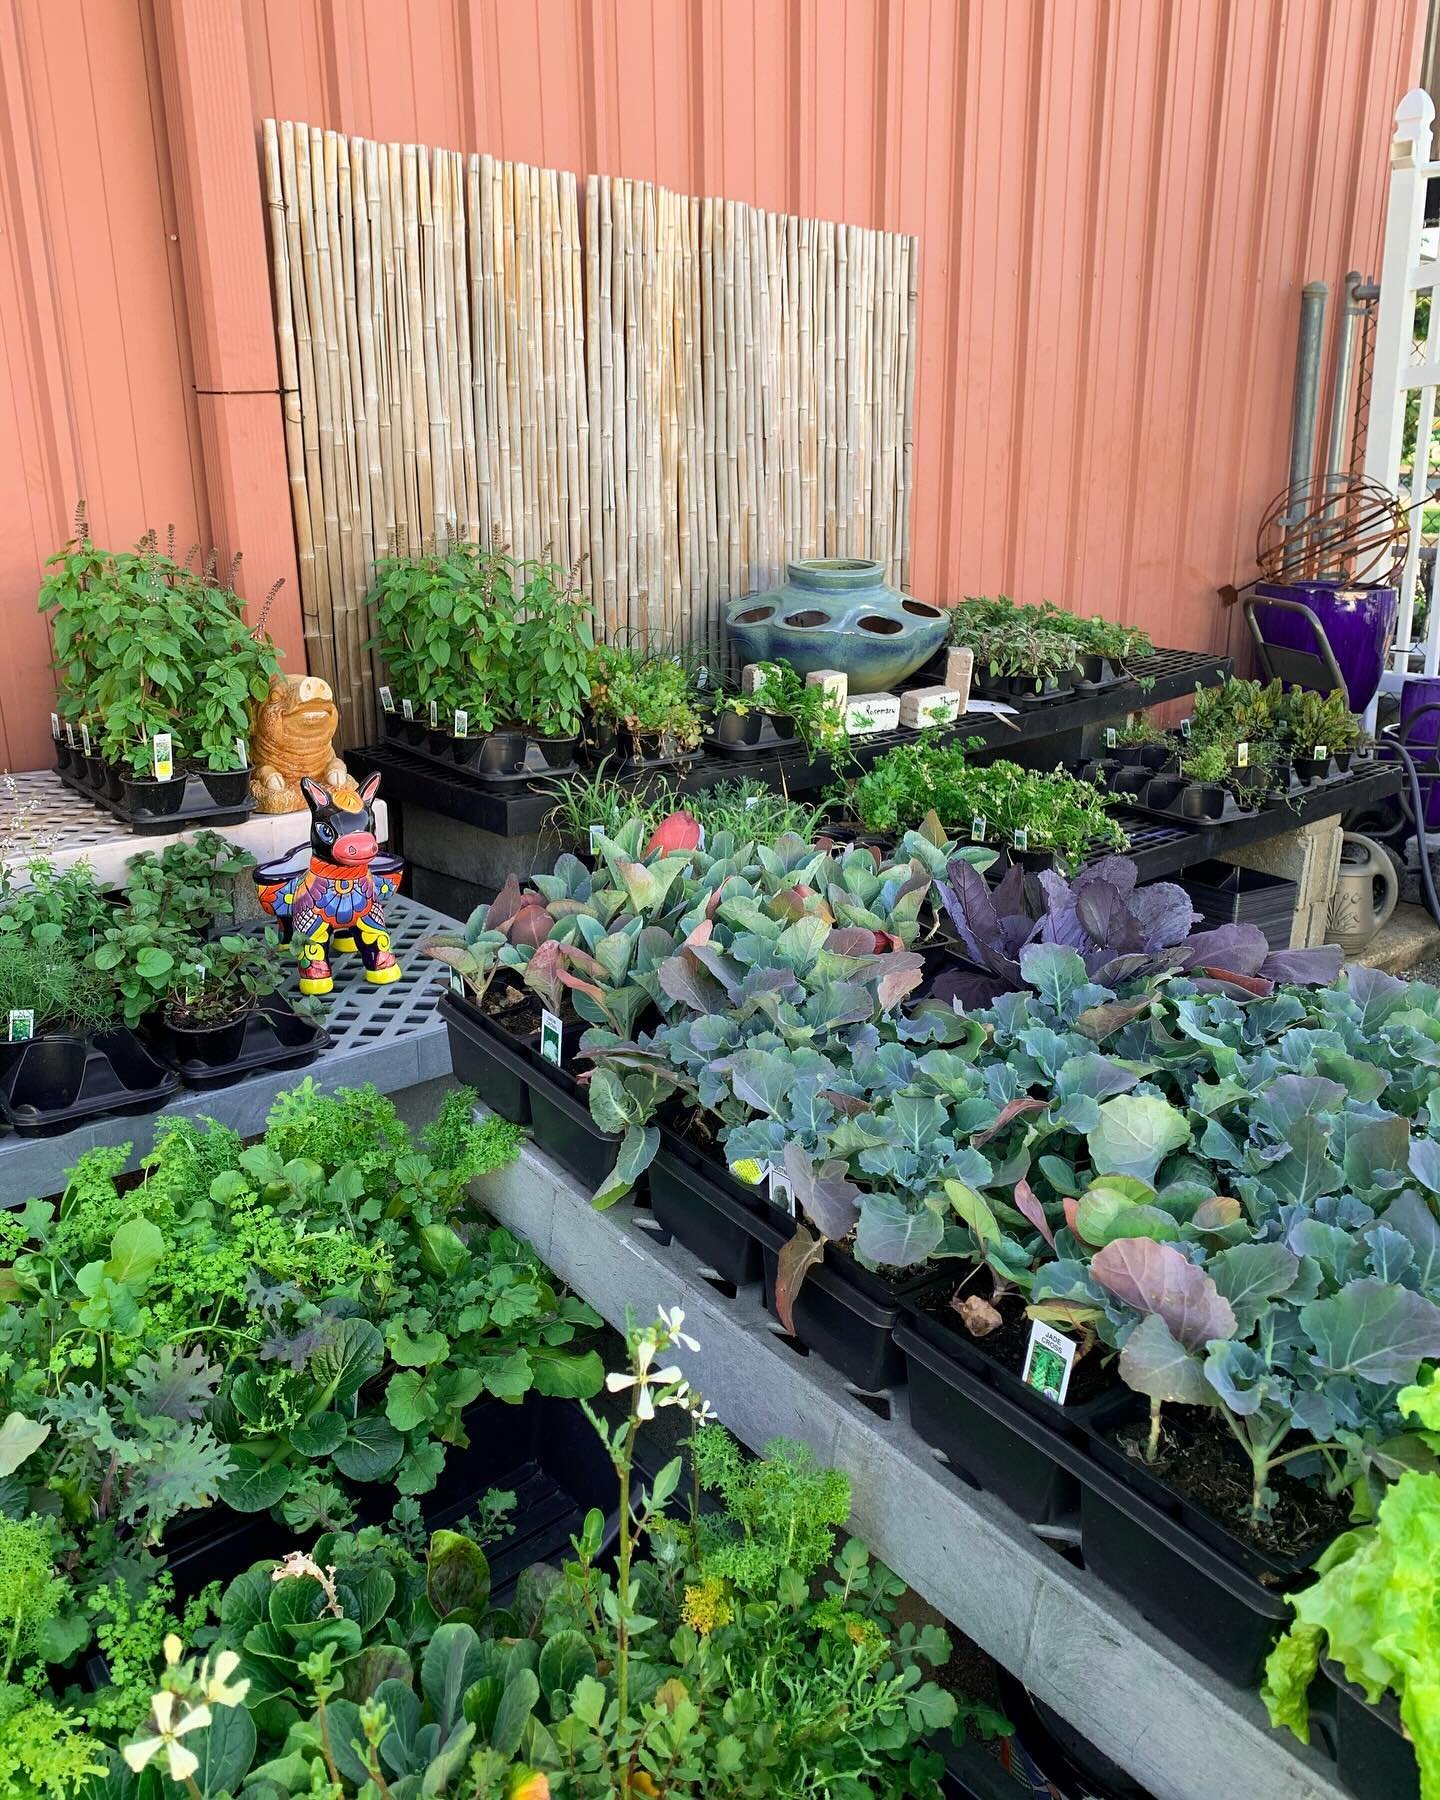 Our lot is starting to fill up with plants😍🪴❤️!! Find veggies like bell peppers🫑, tomatoes🍅, jalape&ntilde;os🌶️, and more! 
Plus you gotta take a peak👀 at our herbs: like basil, parsley, lavender and more! 
And don&rsquo;t forget your potting s